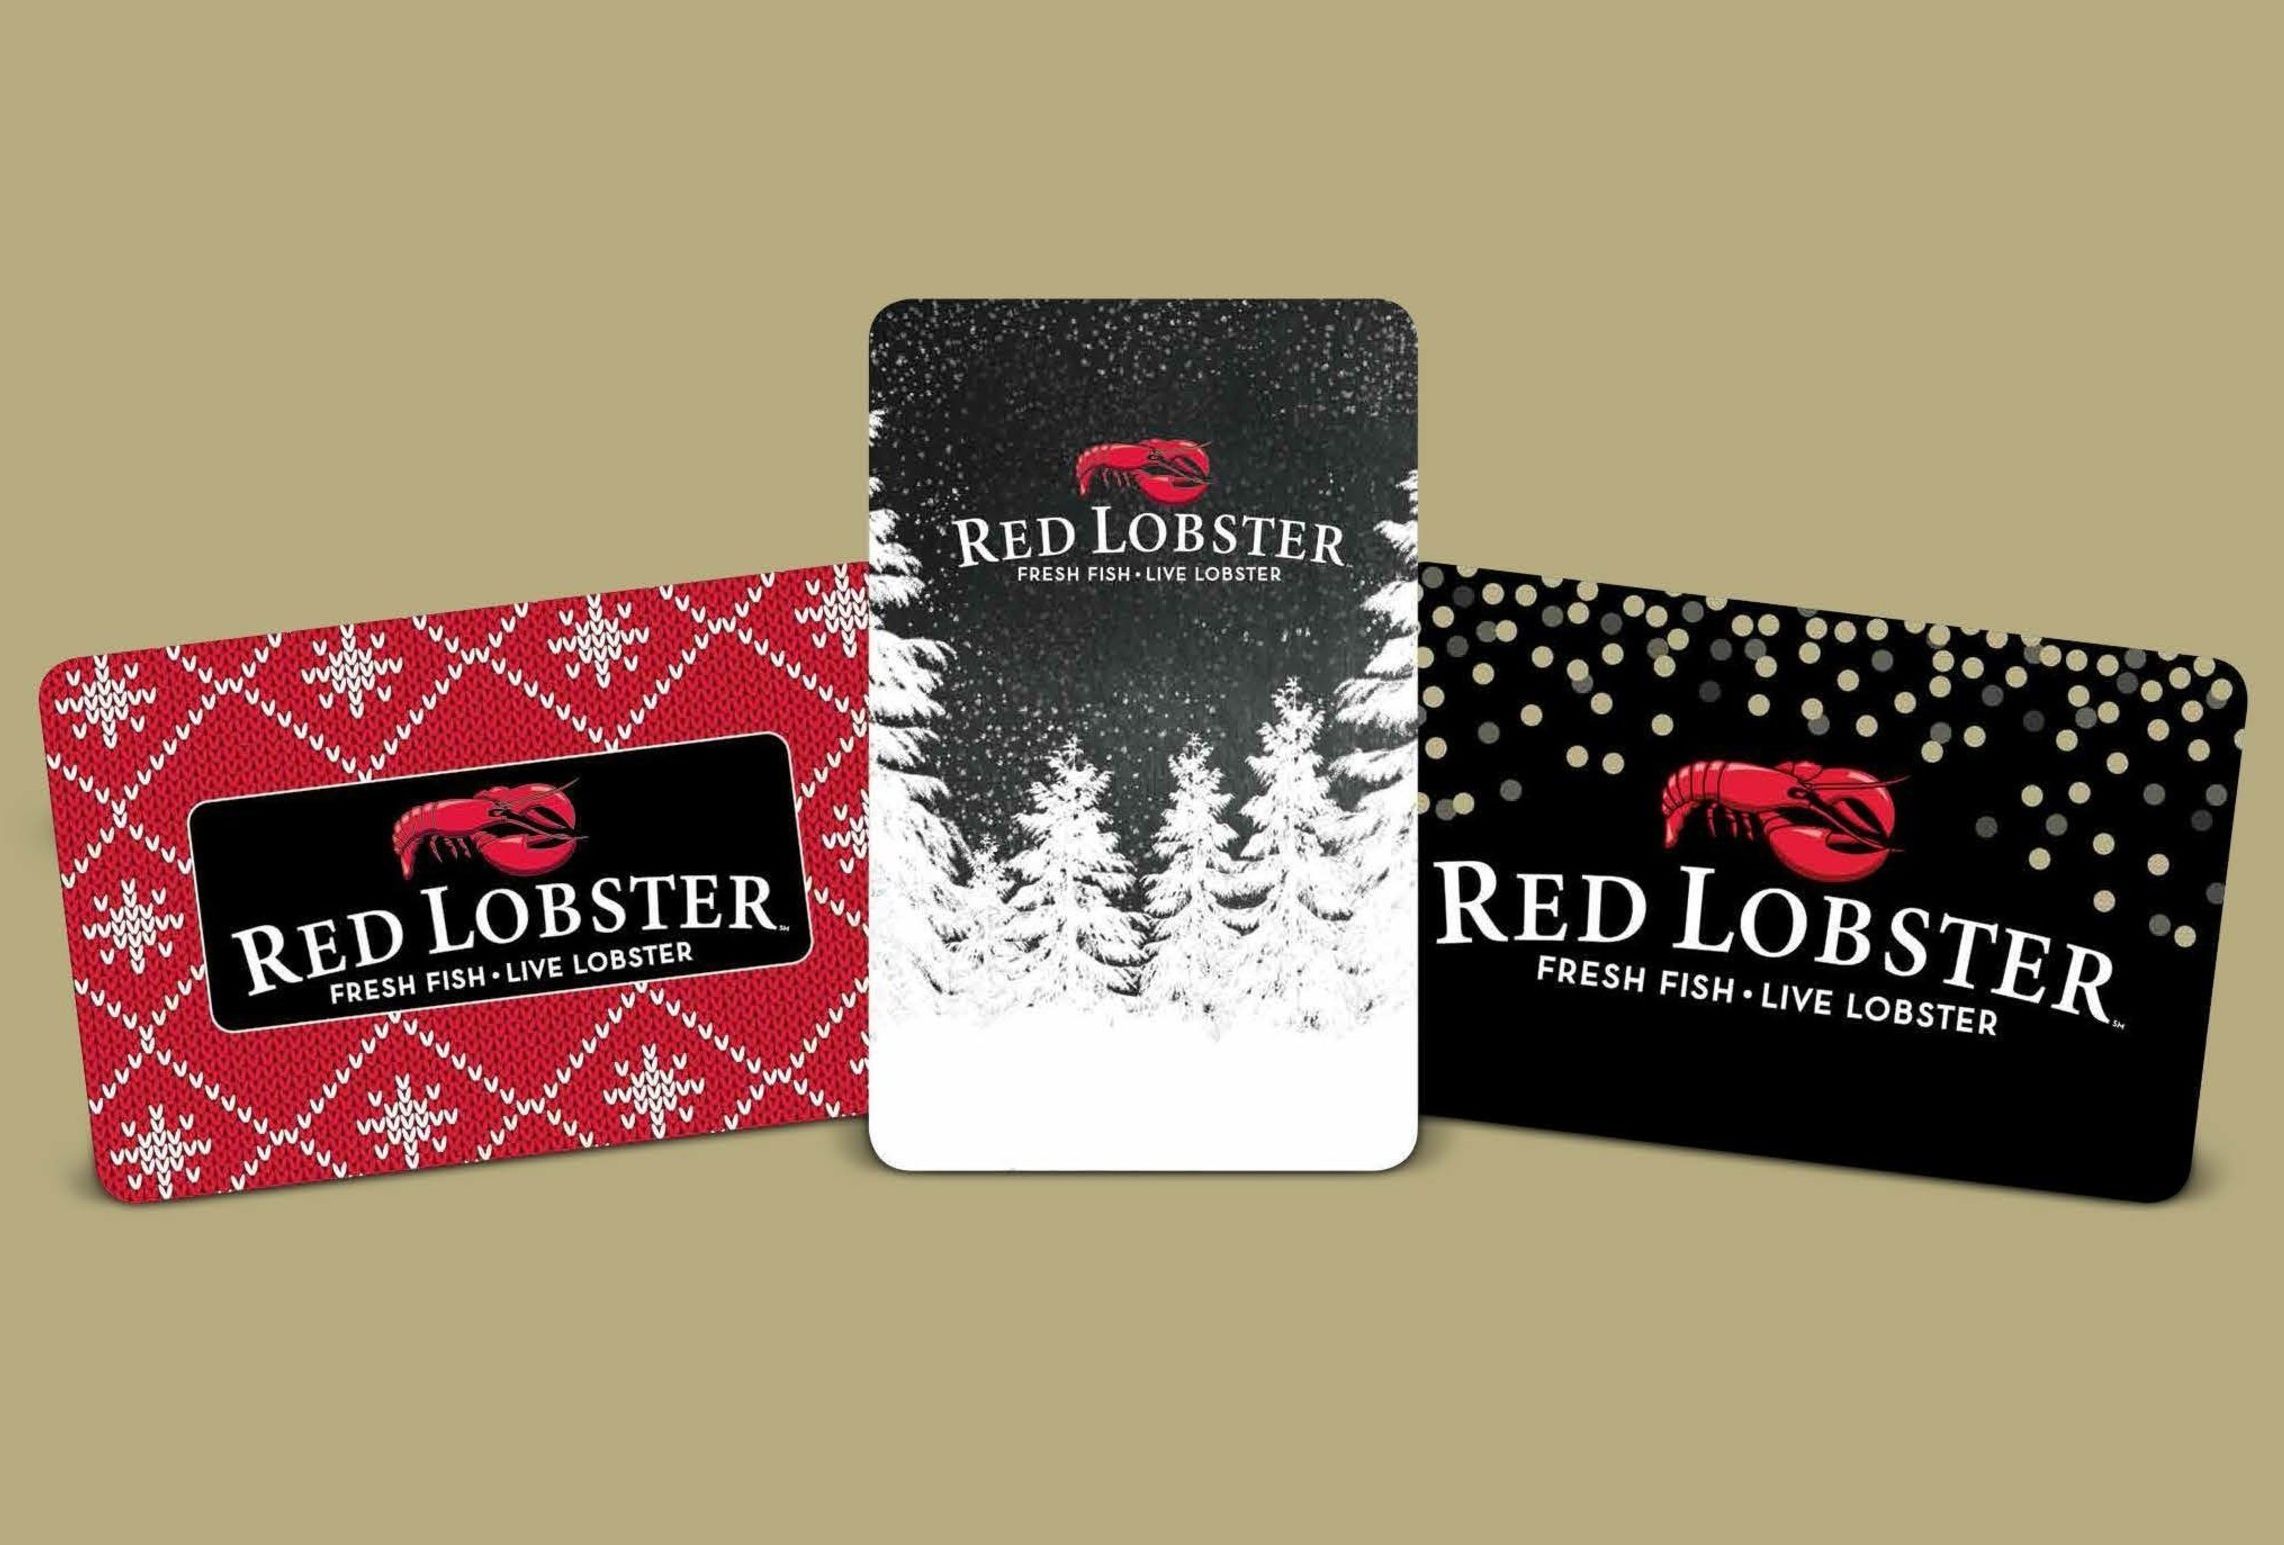 For a Limited Time Only Receive 2 $10 Coupons When You Spend $50+ on Red Lobster Gift Cards